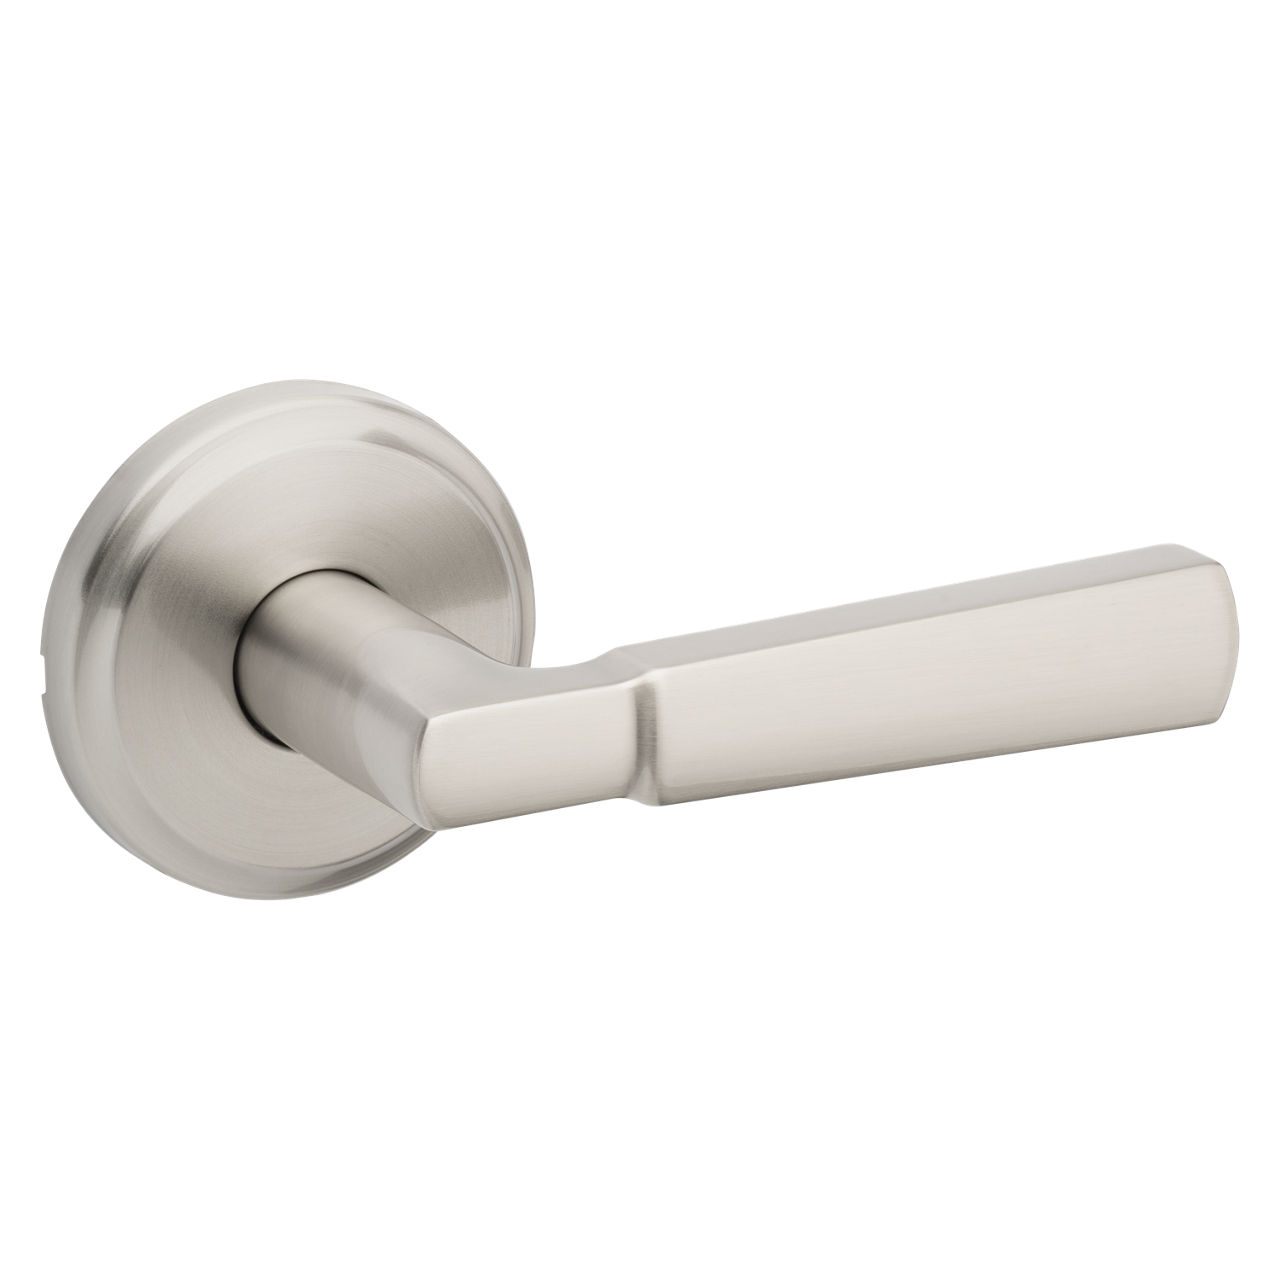 Weiser Breton Satin Nickel Passage Lever Handle with Square Rose